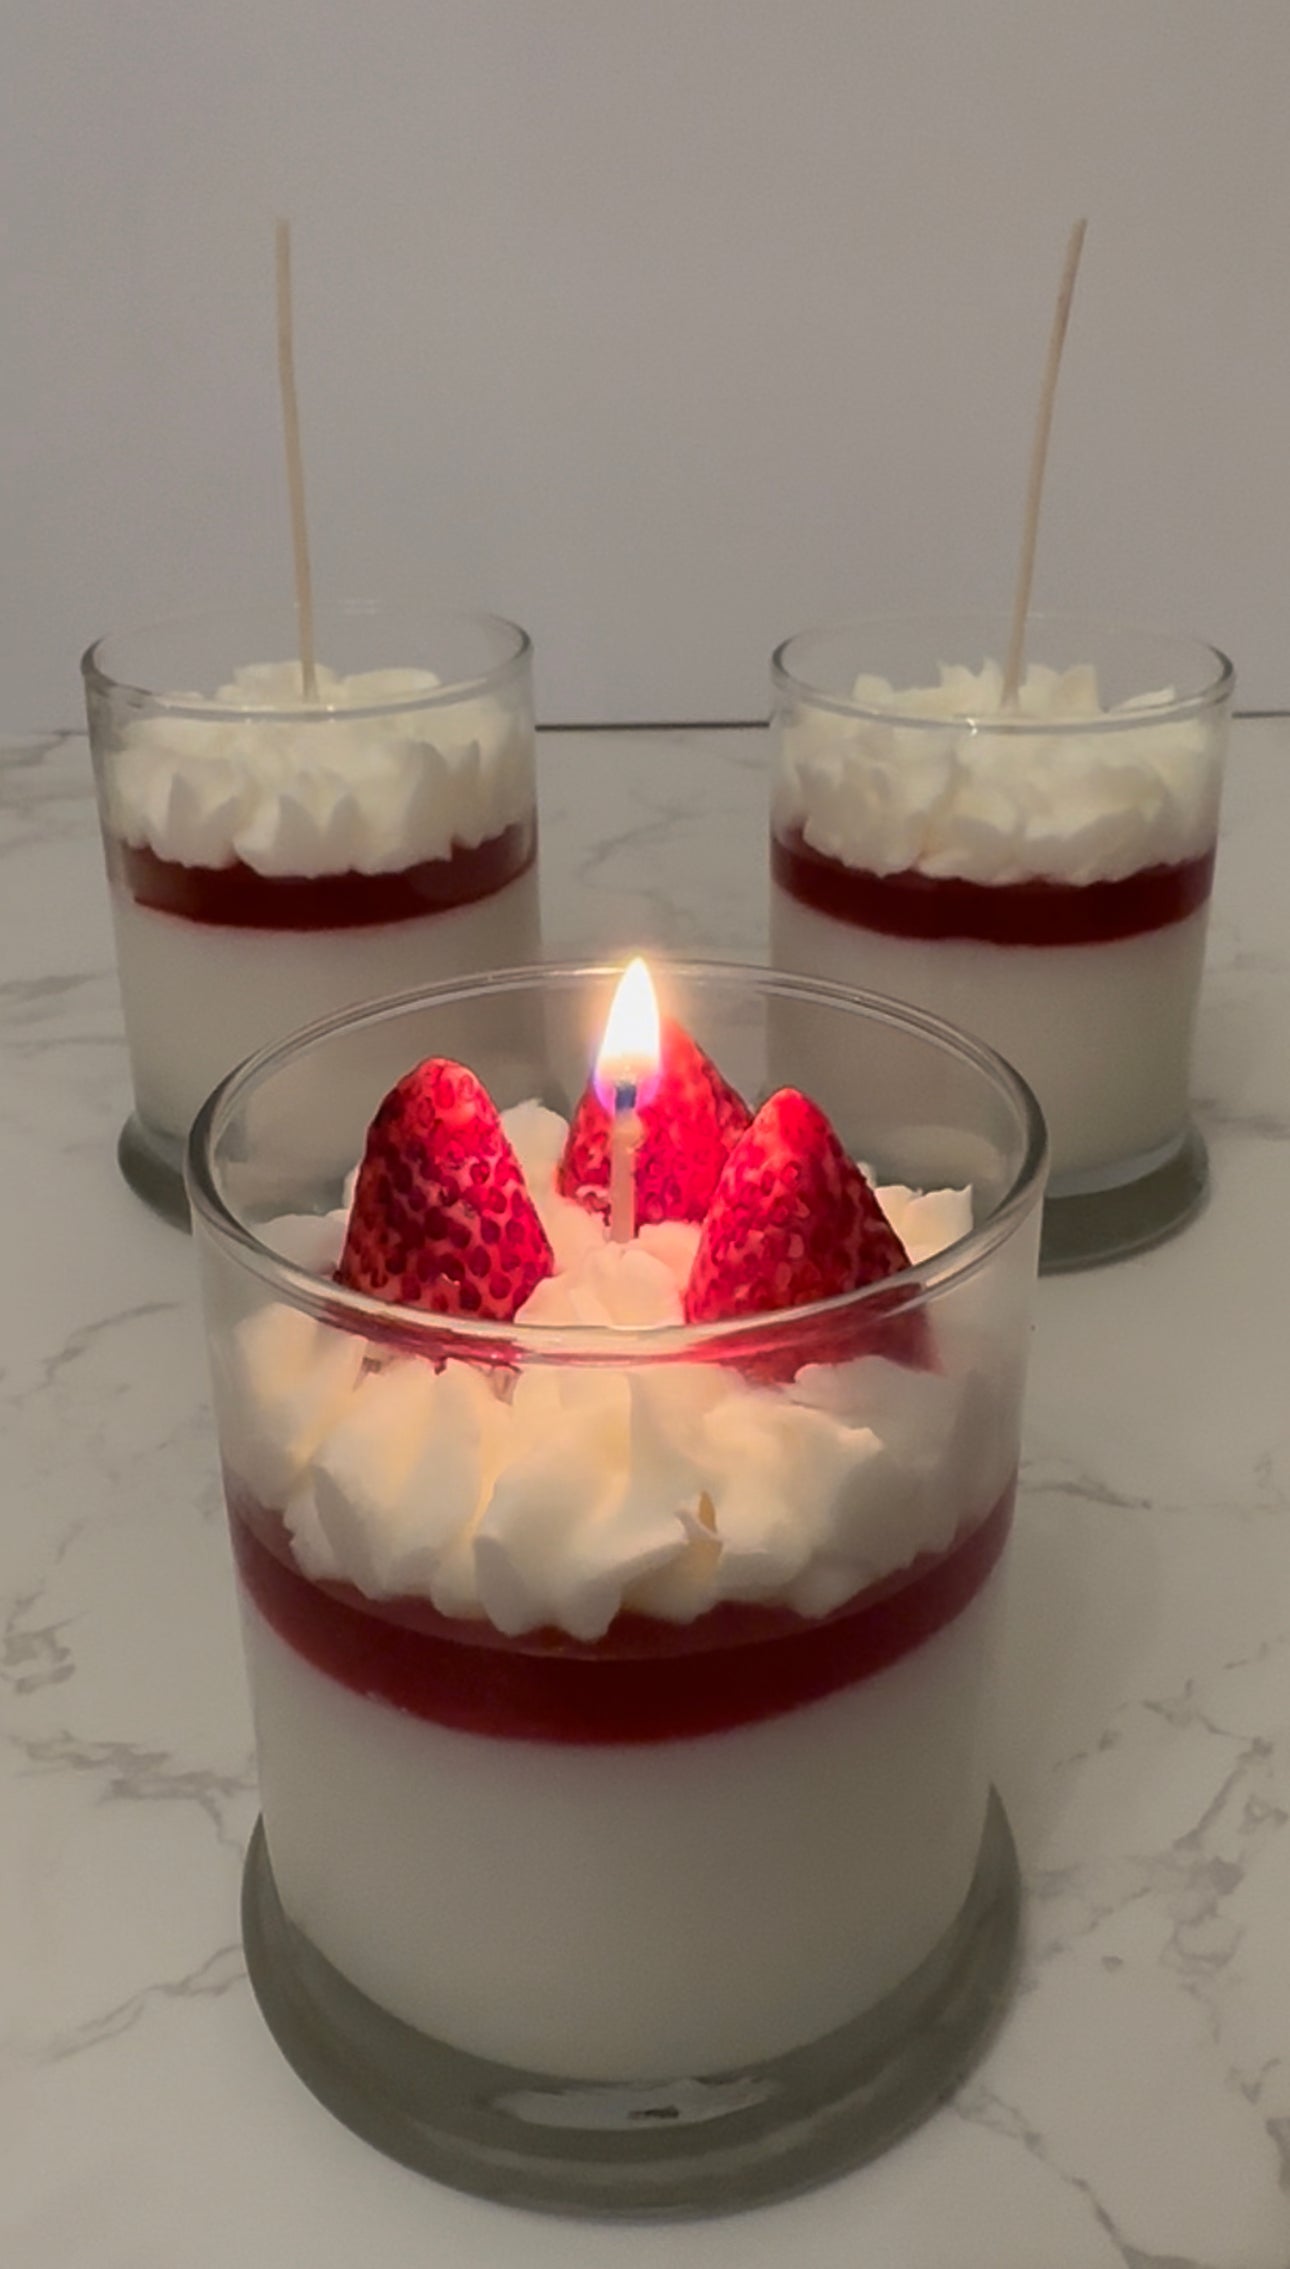 Strawberry Candle